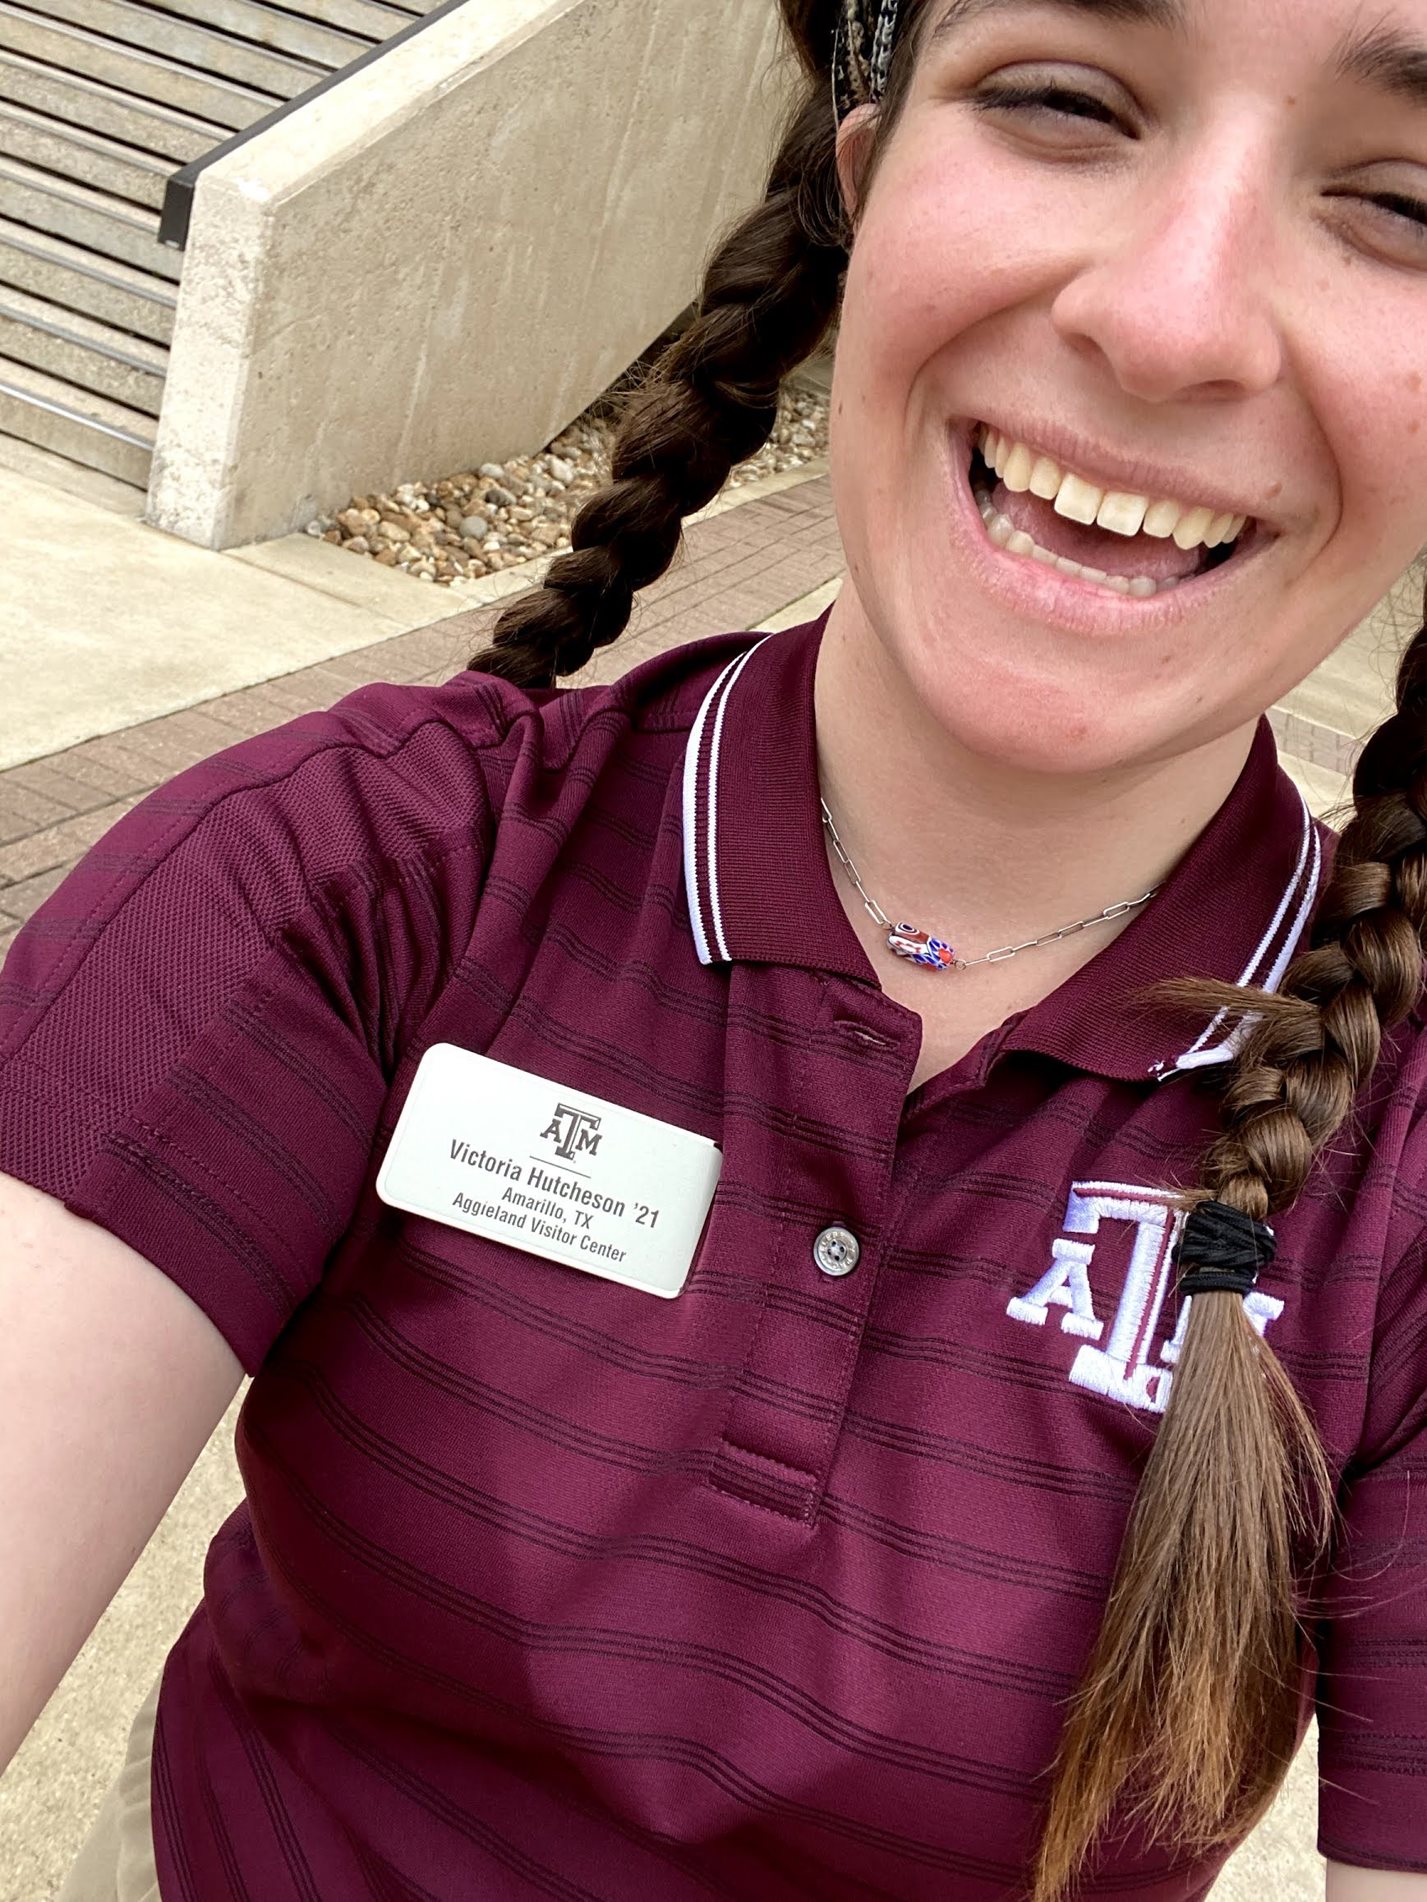 Student takes a selfie as a campus tour guide.